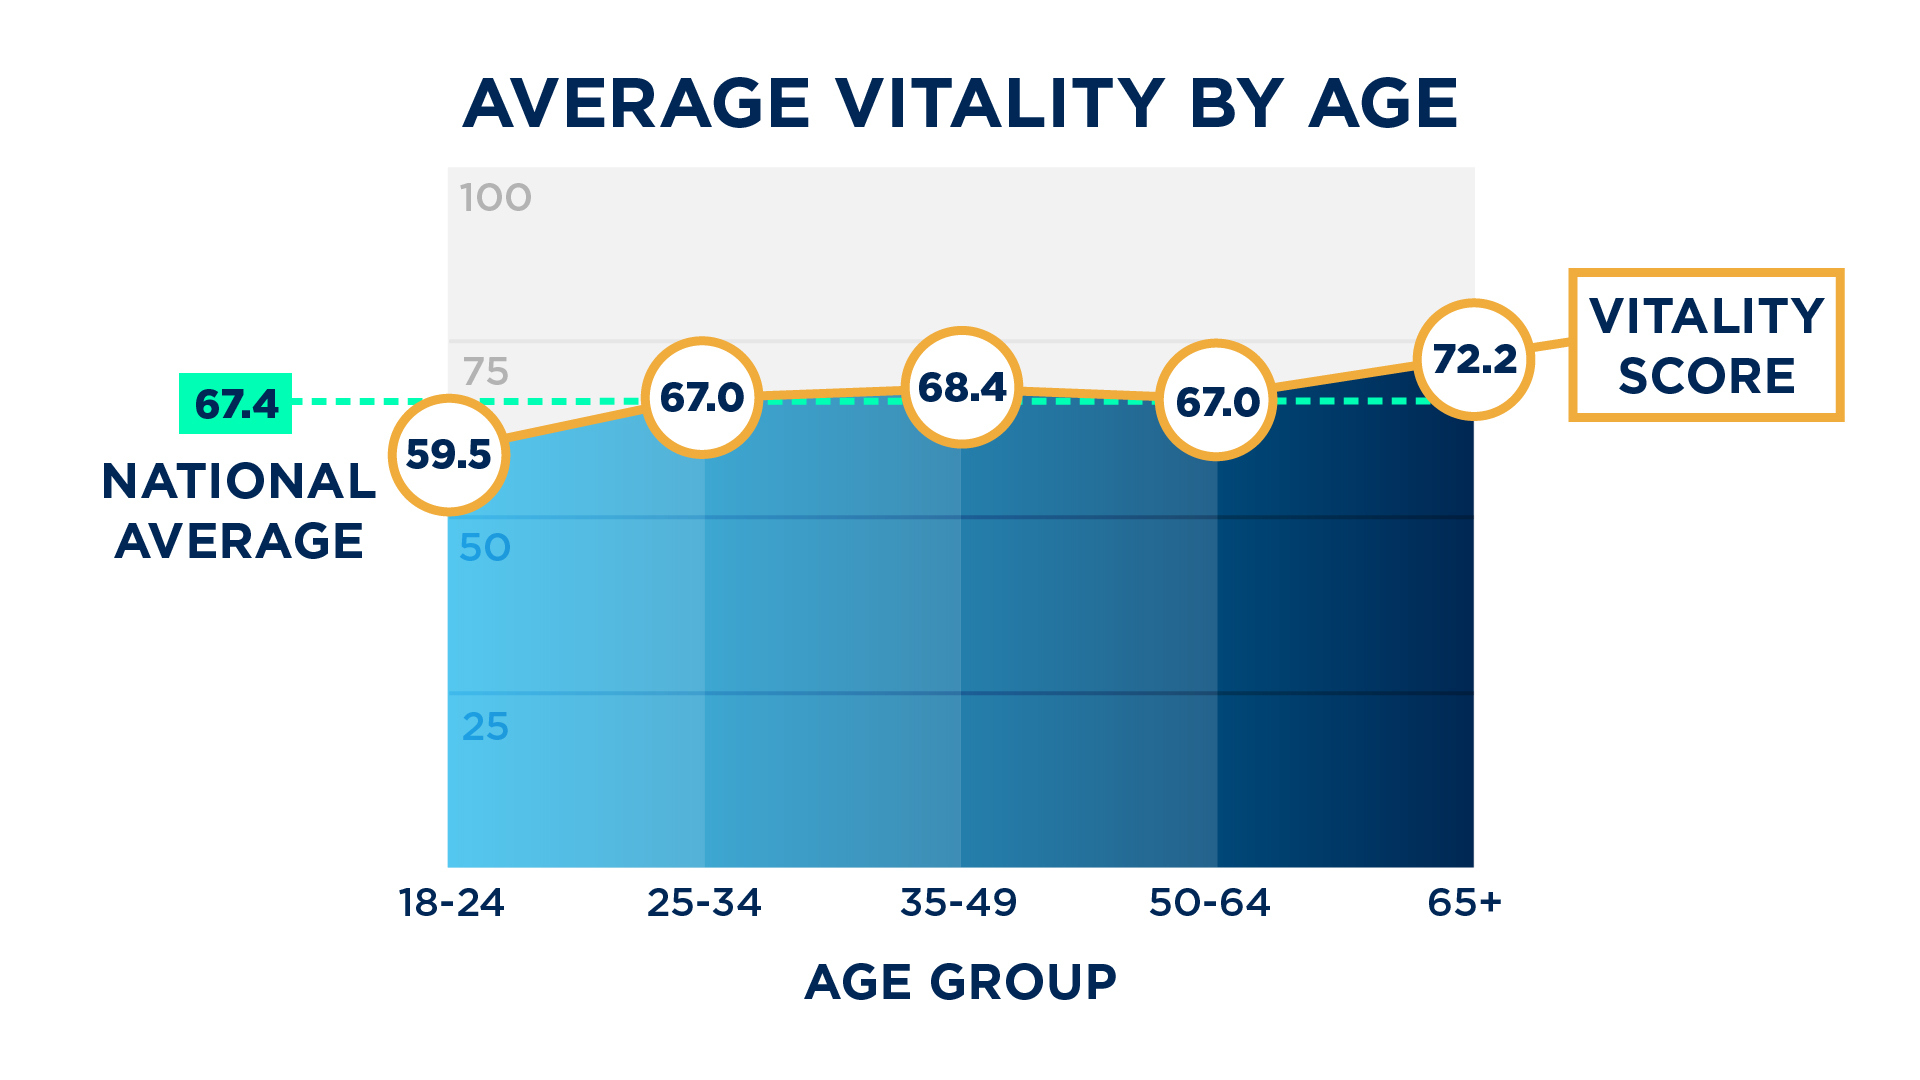 Generation Z adults are struggling the most. One in four Gen Z adults report low vitality levels, which is in stark contrast to the proportion of older adults who fall into the low vitality category.